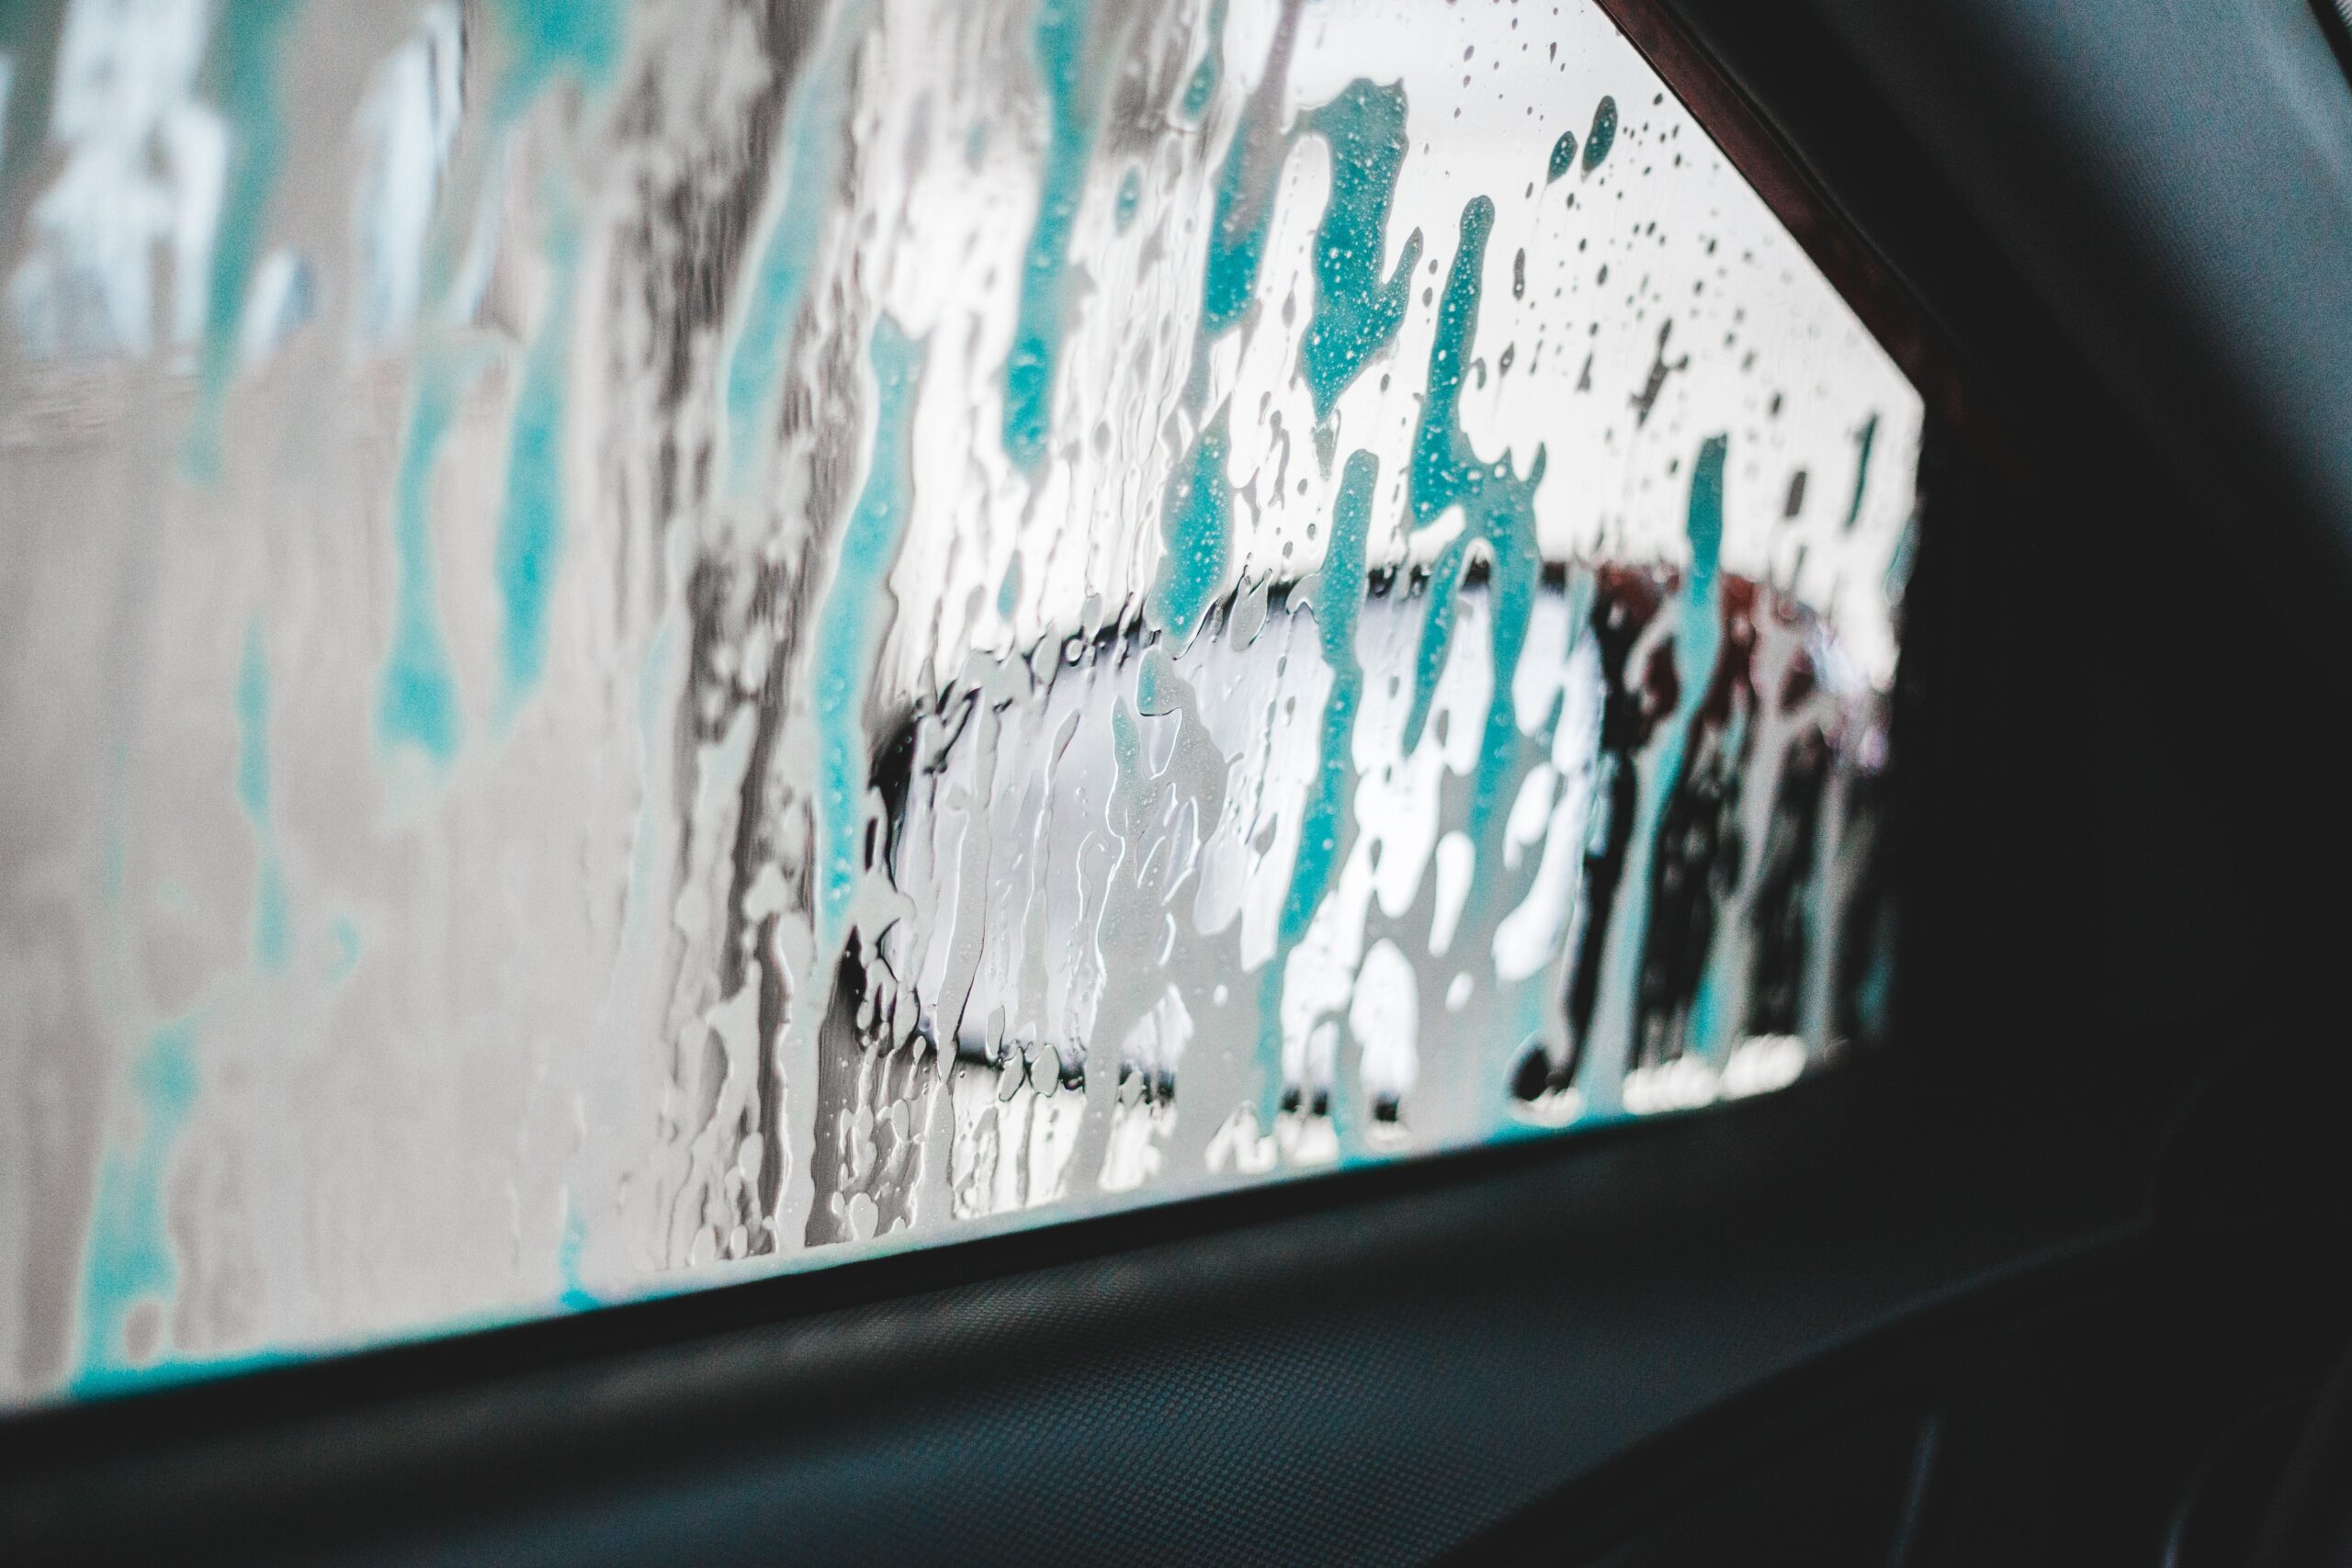 How to clean car windows without streaks